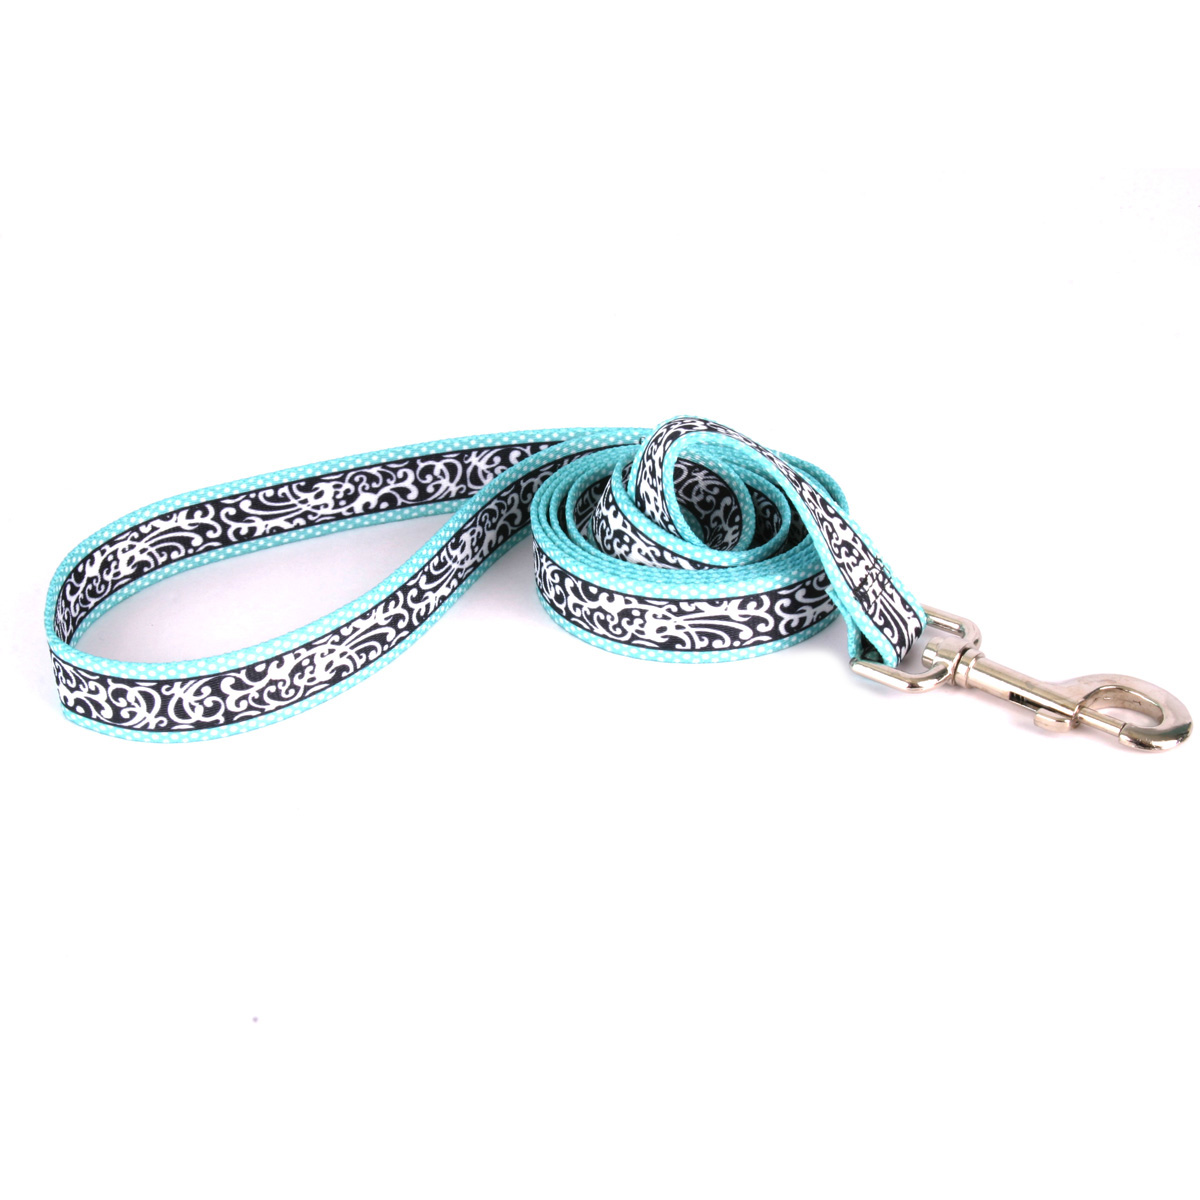 Chantilly Dog Leash by Yellow Dog - Teal